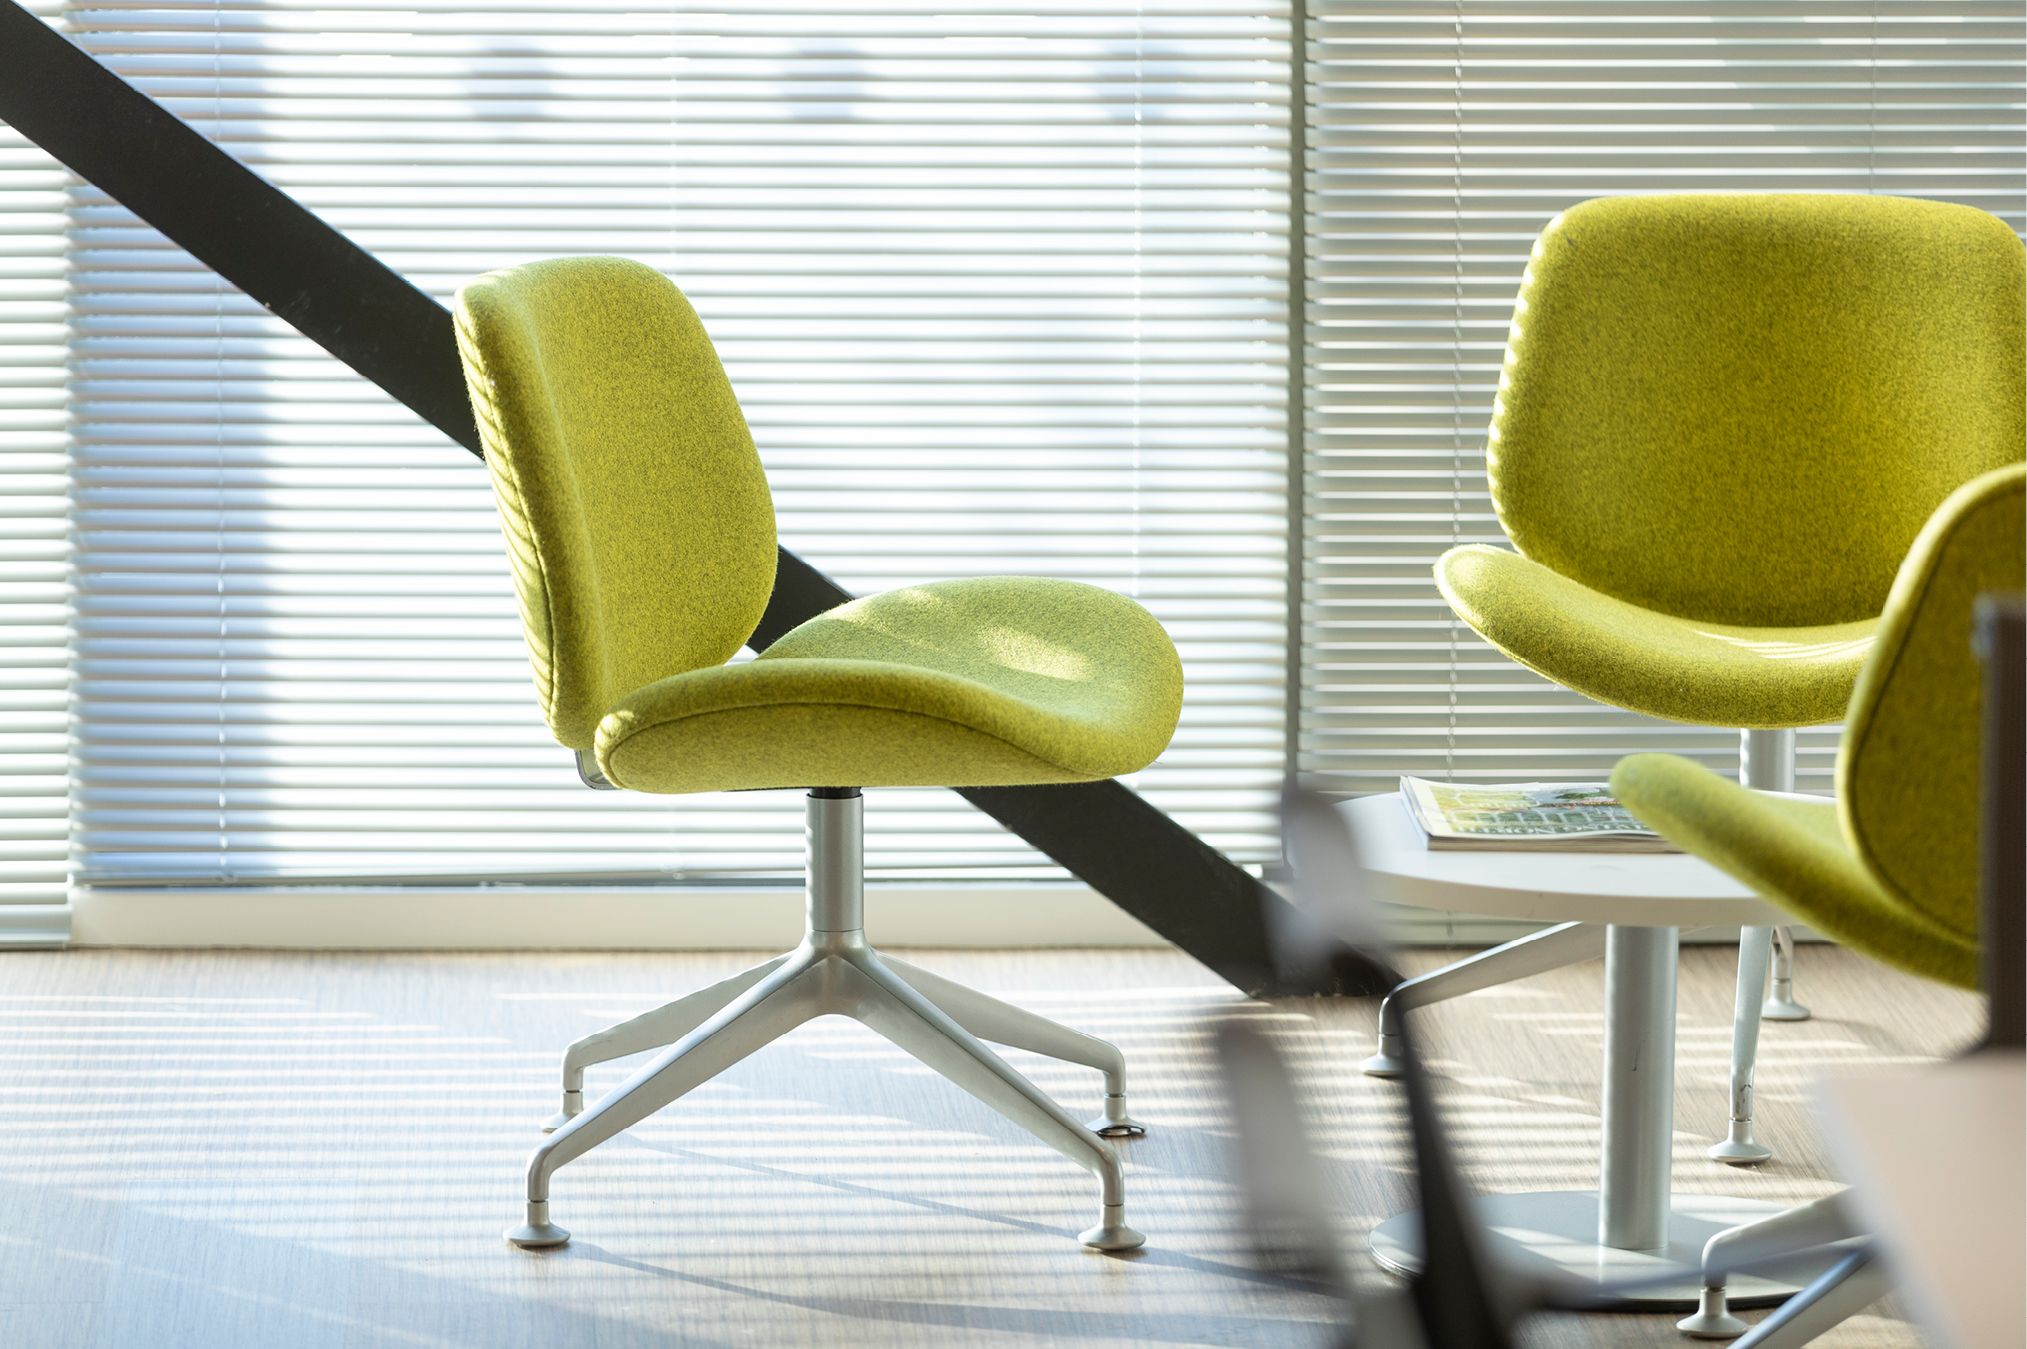 Closer detail of lime green chair in social seating area located within Northumbria University Business Incubator